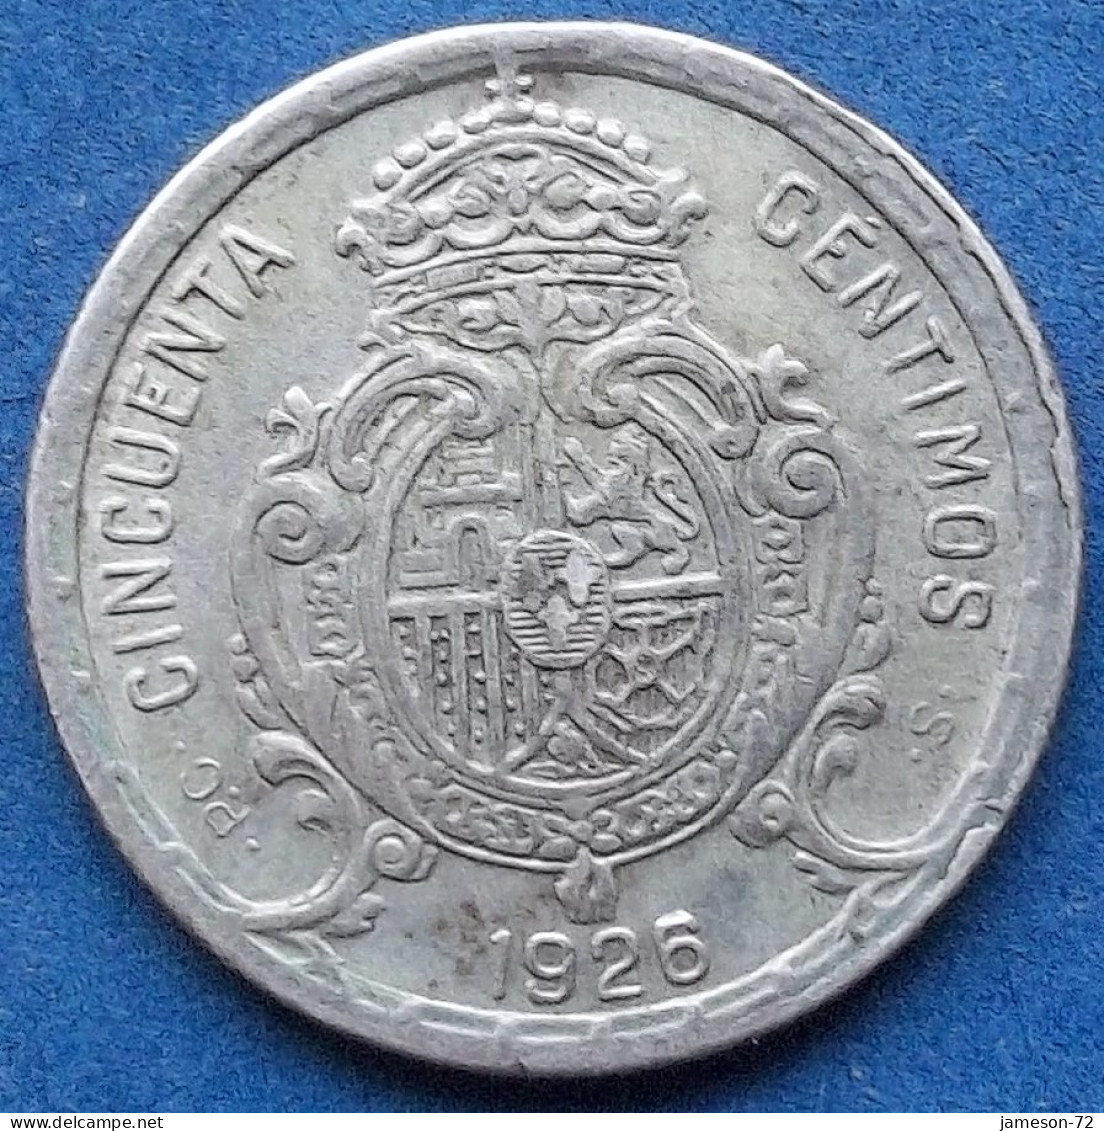 SPAIN - Silver 50 Centimos 1926 PC S KM# 741 Alfonso XIII (1886-1931) - Edelweiss Coins - Primi Conii